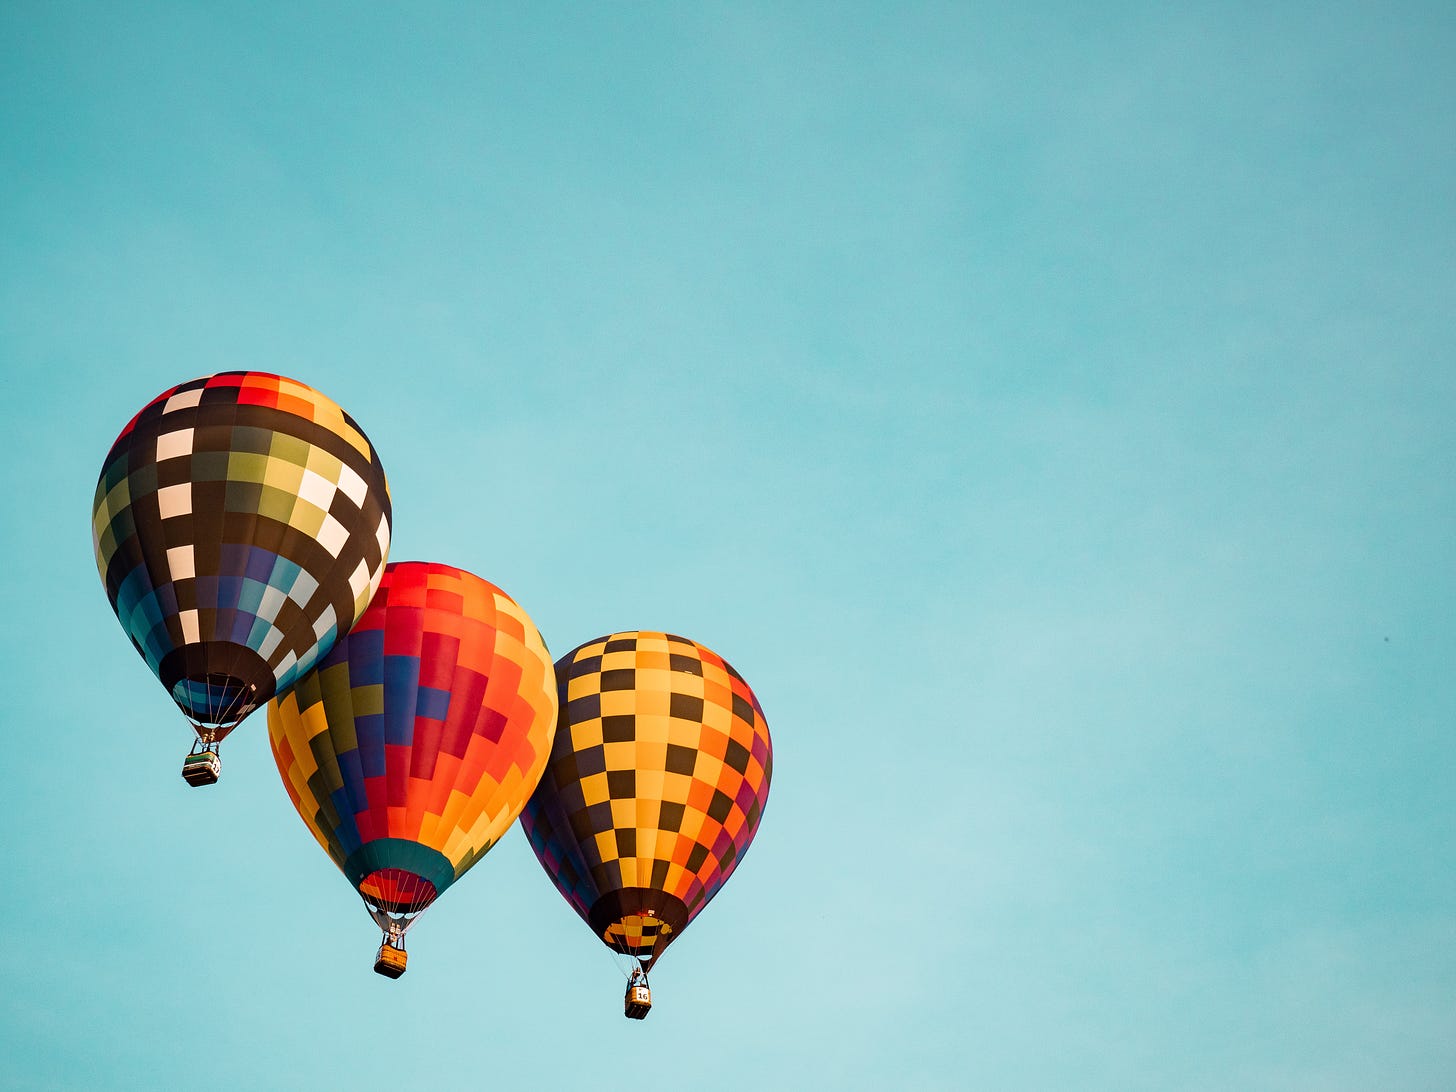 Image of three hot air balloons in a blue sky